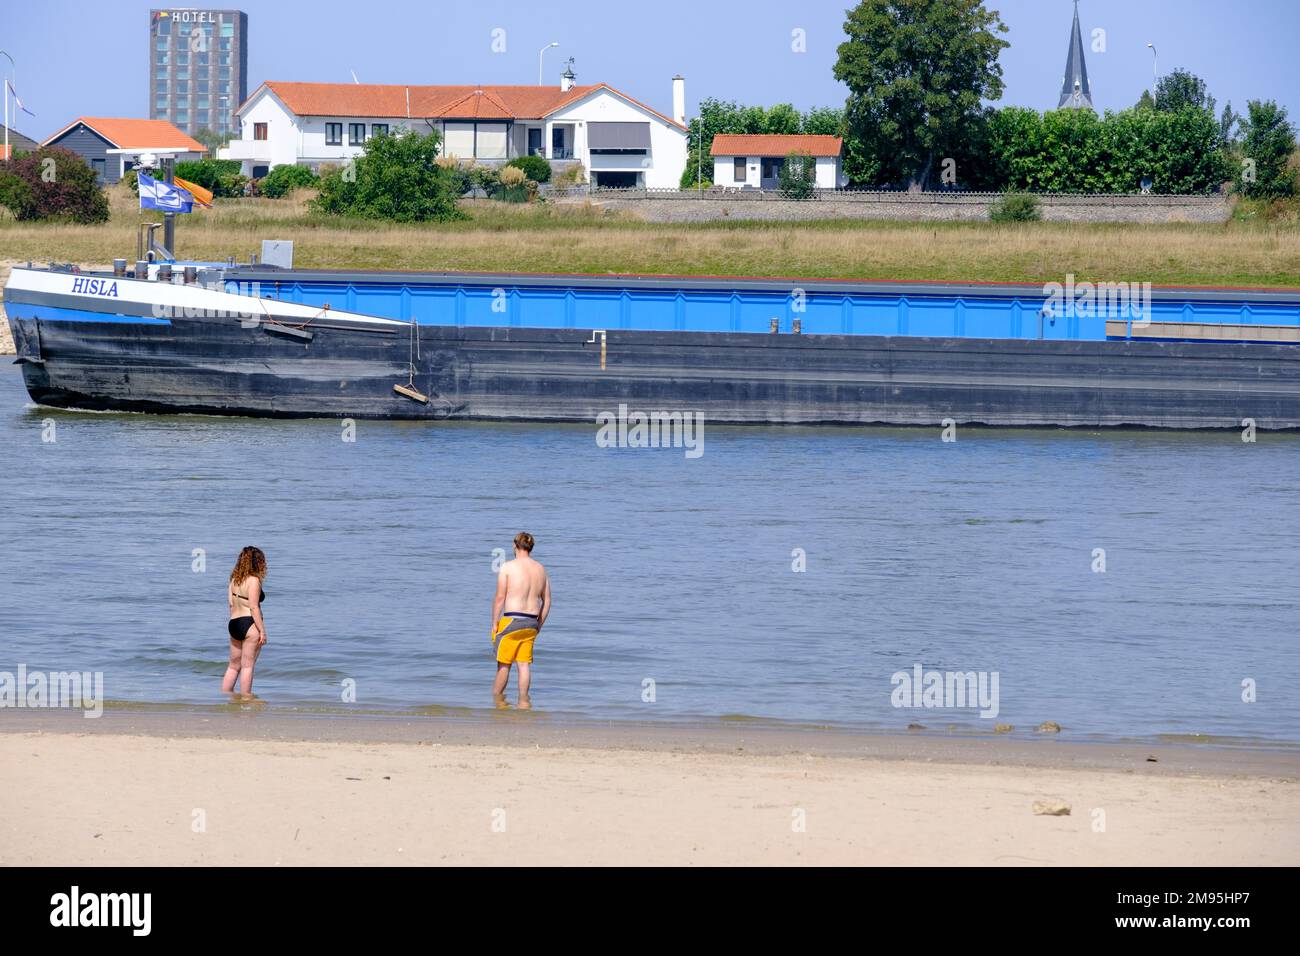 Netherlands,Ooyse Schependom, August 23, 2022: people on the banks of the River Waal, Rhine delta, during the drought of summer 2022. People swimming Stock Photo